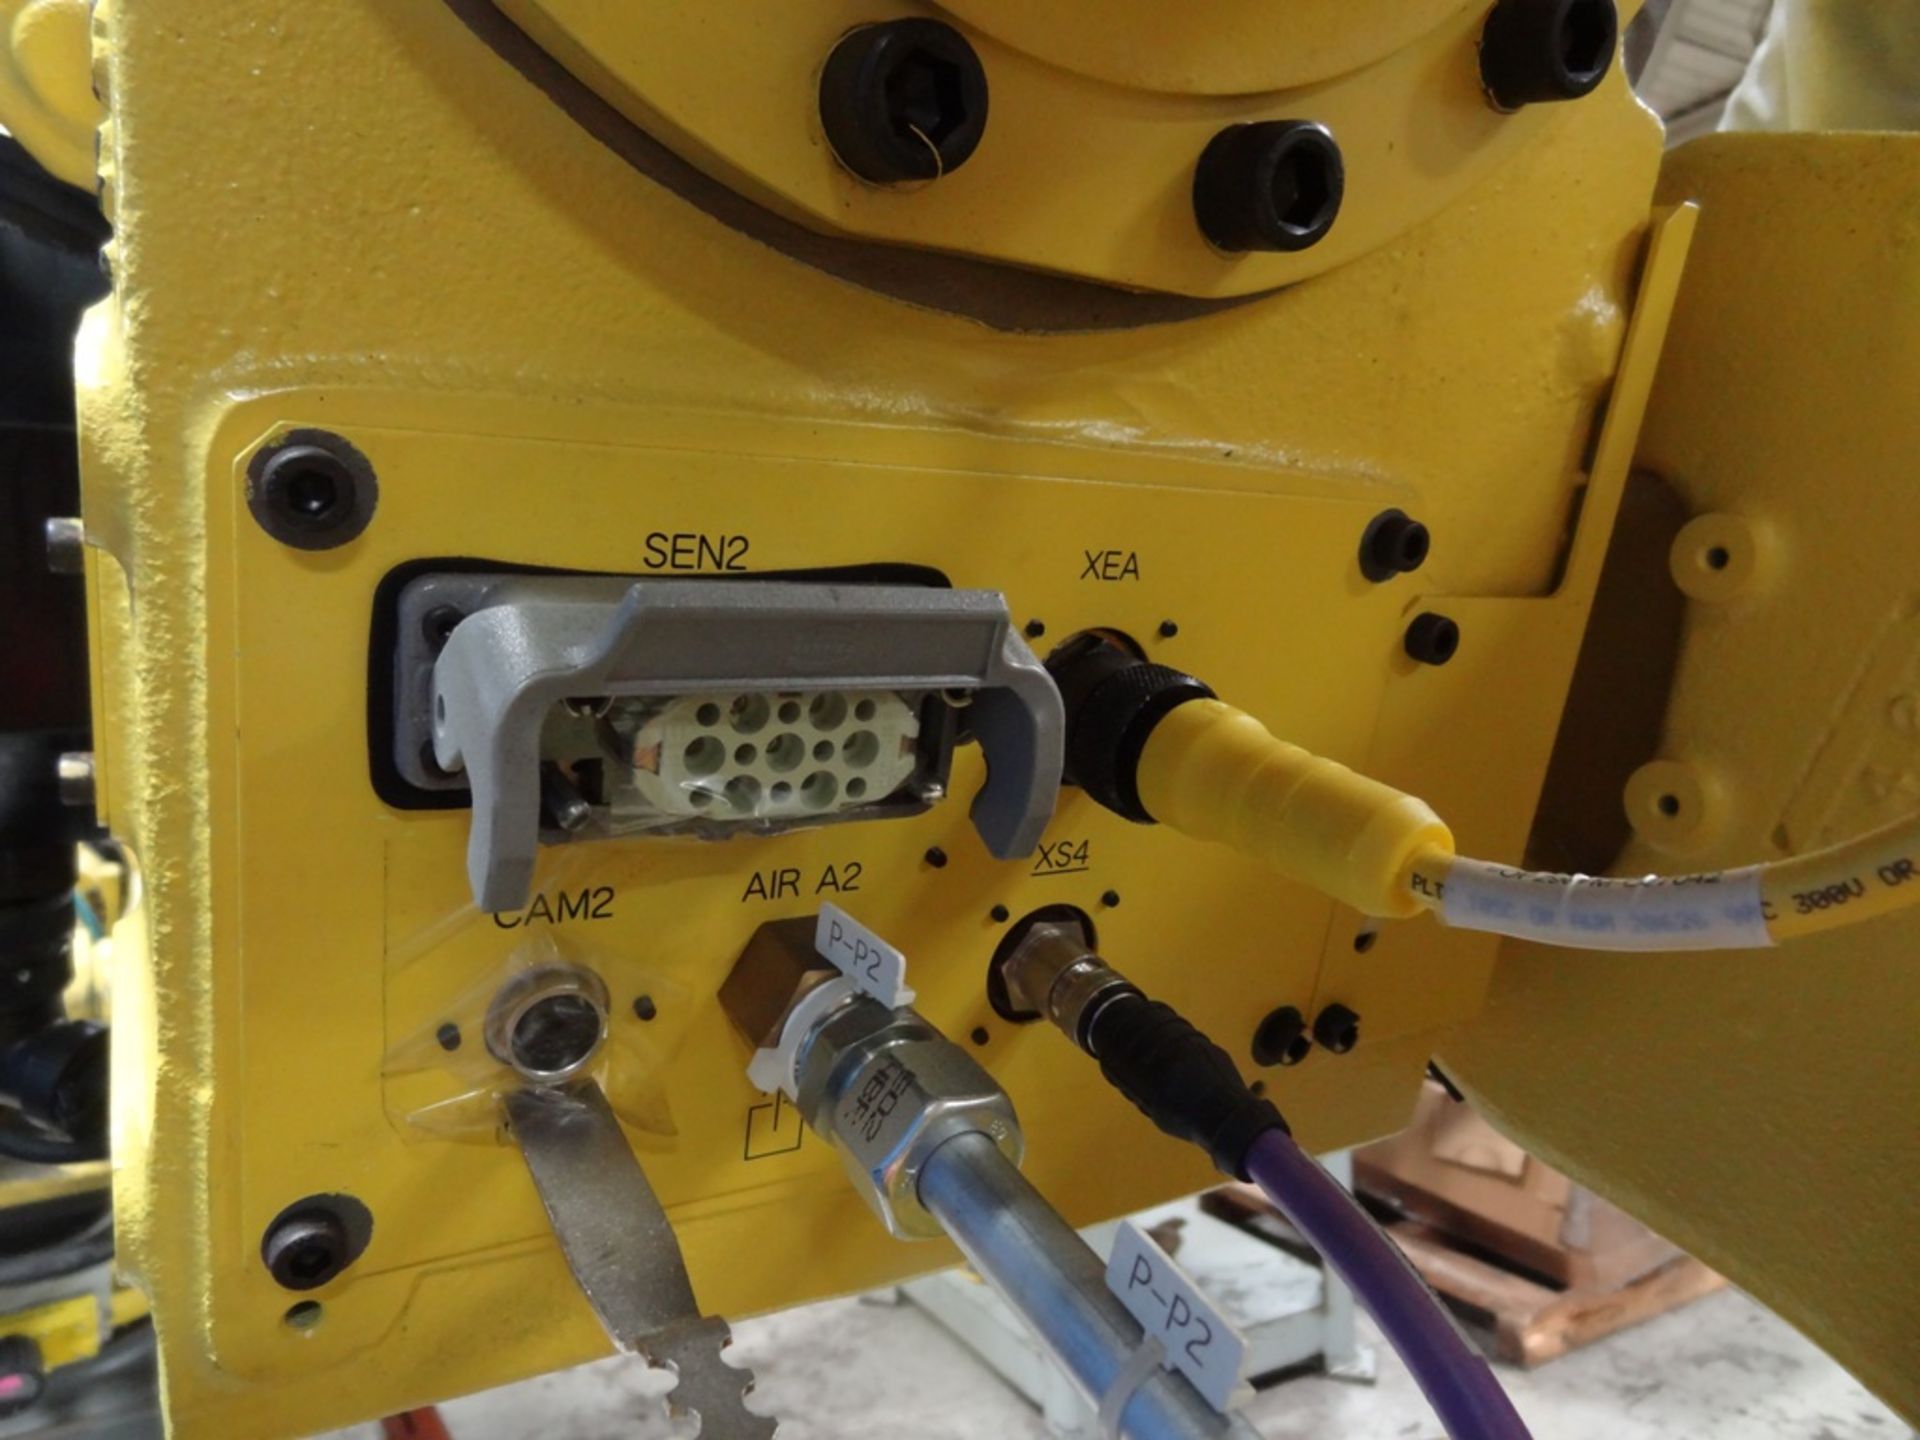 FANUC R2000iB/210F ROBOT WITH R30iA CONTROLLER, W/ VISION CON, SN F111075, YEAR 6/2011, LOCATION MI - Image 7 of 7